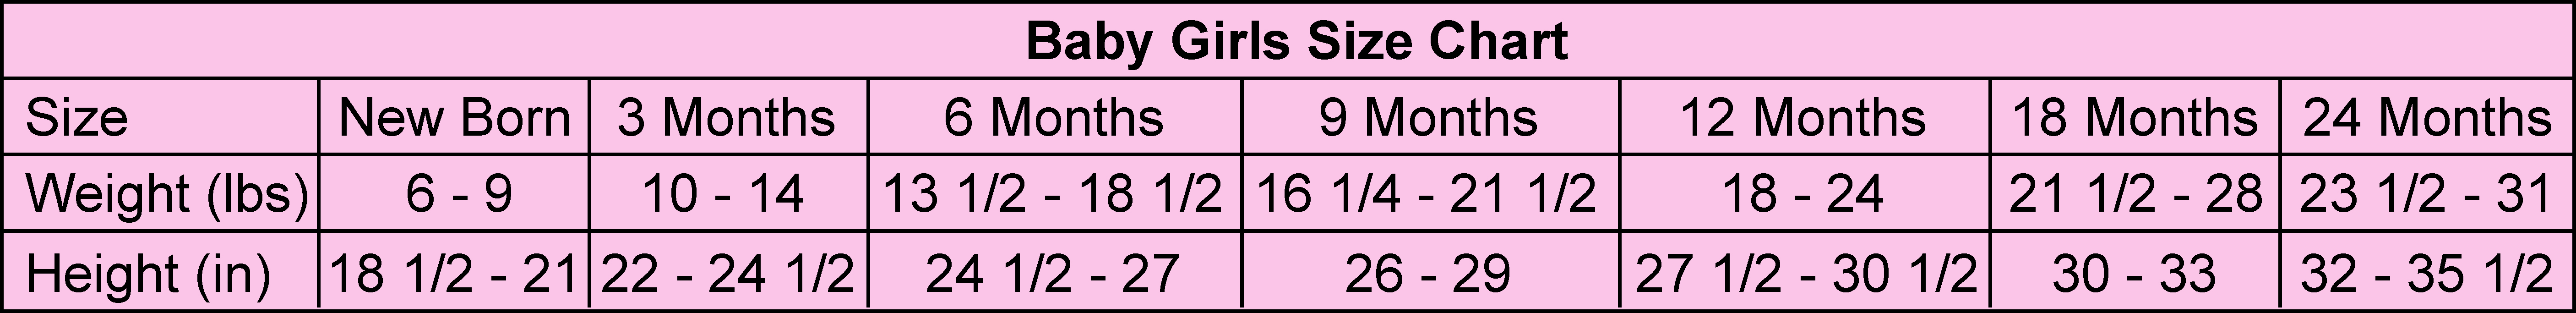 Baby girls weight and height size chart